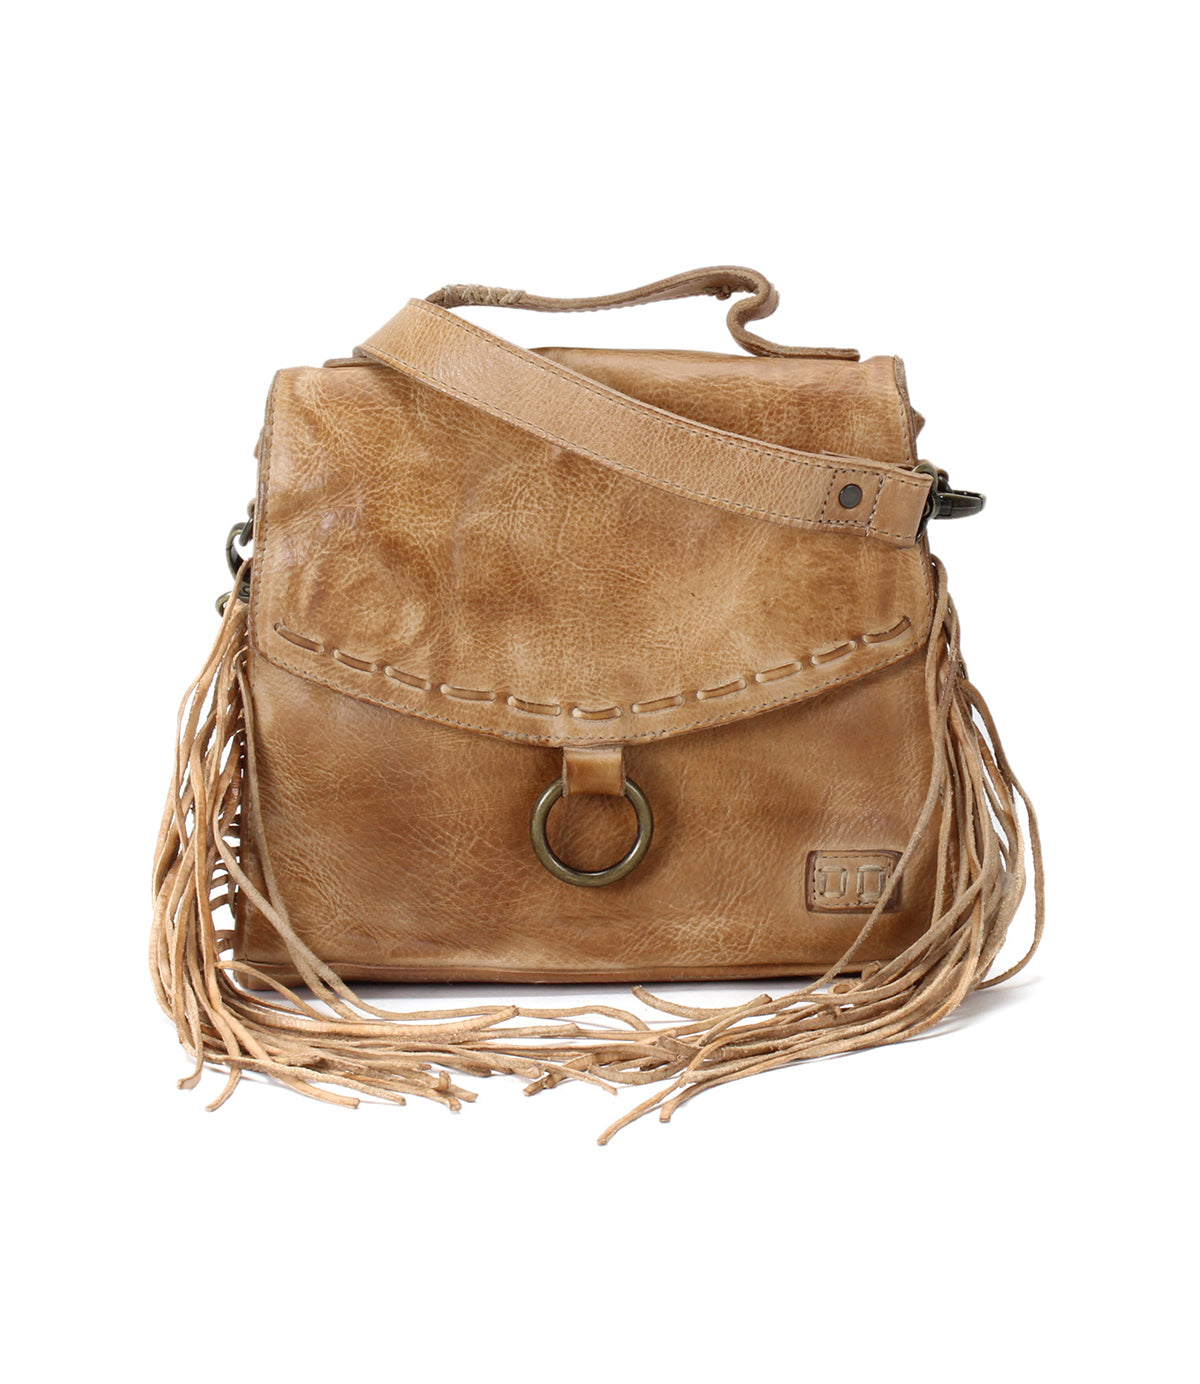 Hidden by Bed Stu: A tan leather crossbody bag with fringes.